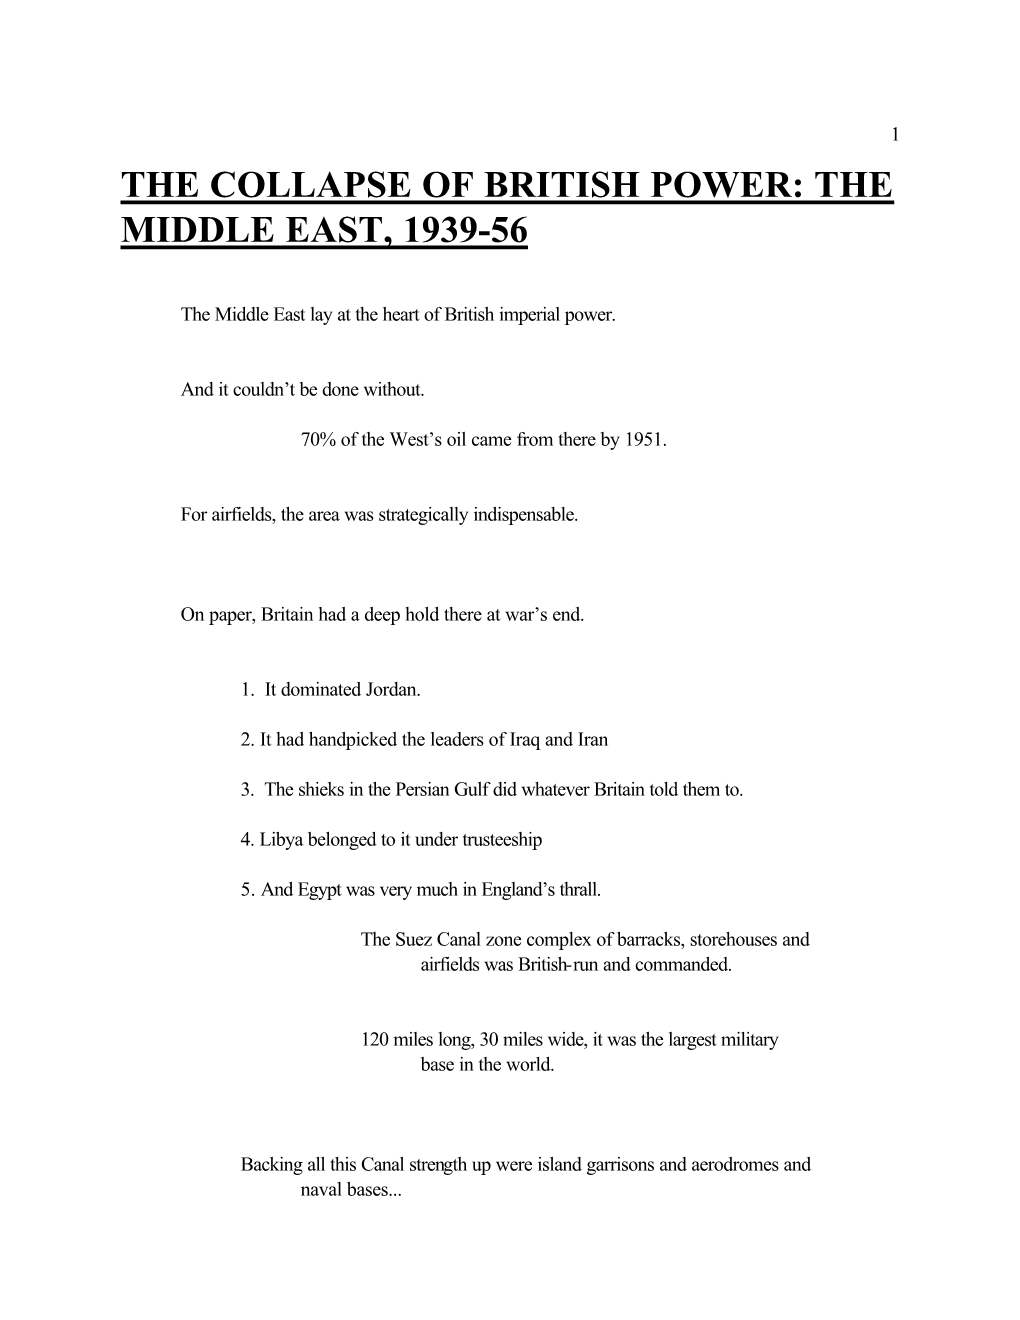 The Collapse of British Power: the Middle East, 1939-56